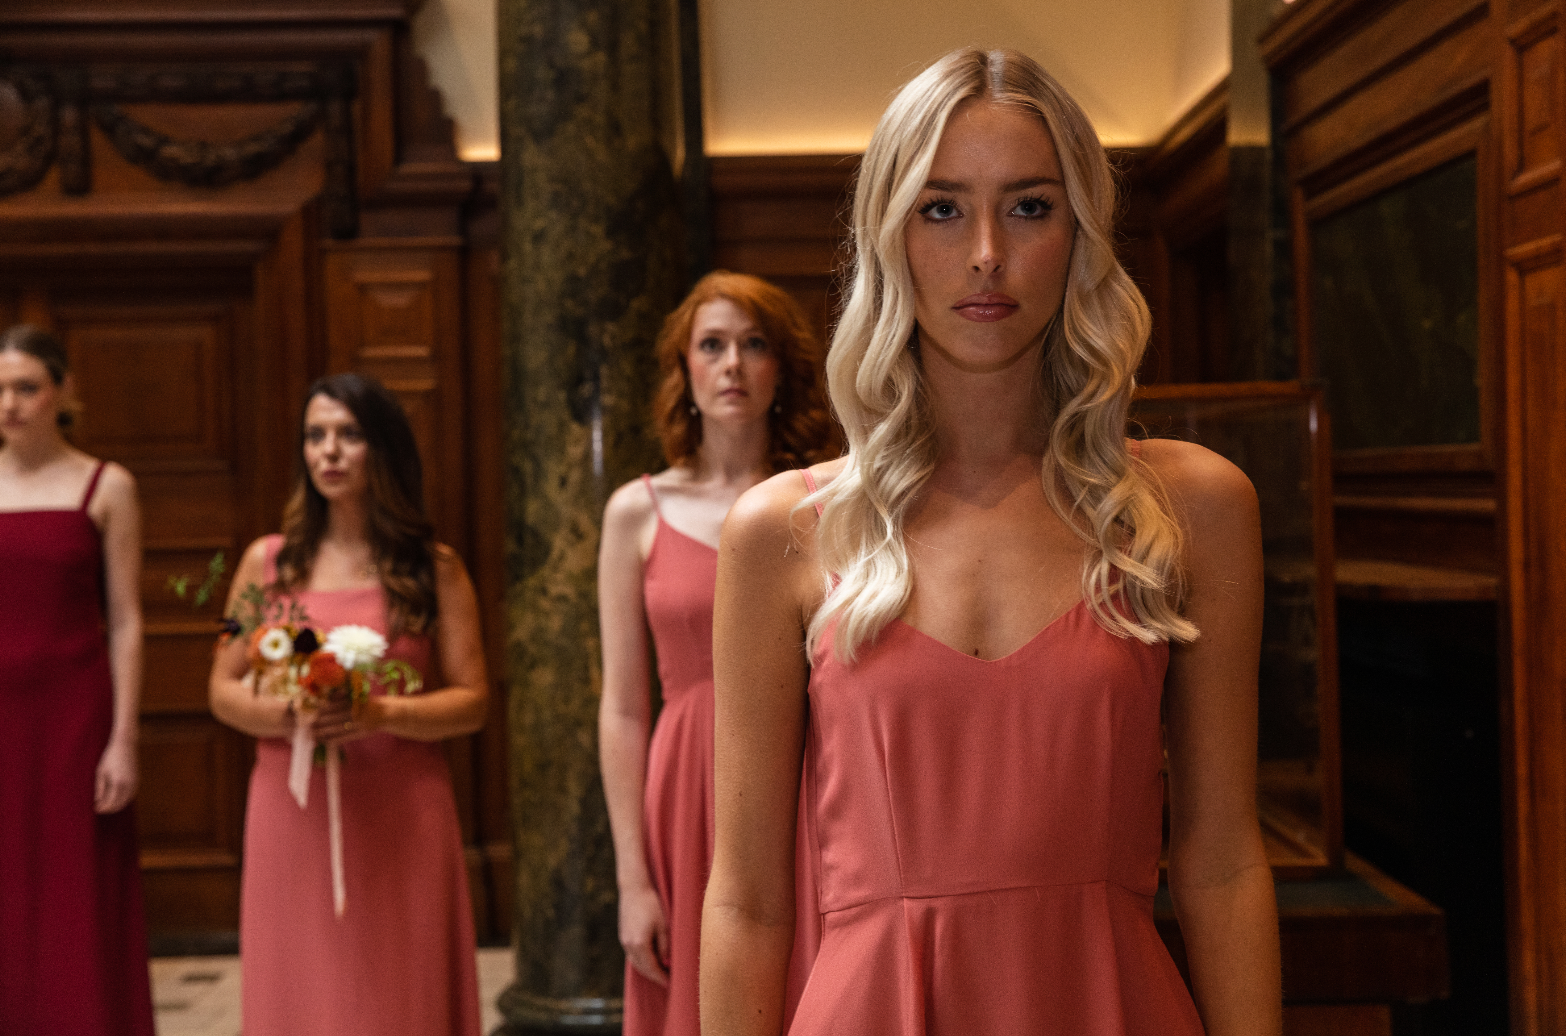 A group of girls standing in the foyer of the Town Hall Hotel in a regimented formation, all in a mix of red, coral and orange bridesmaids dresses, some holding bouquets of flowers.